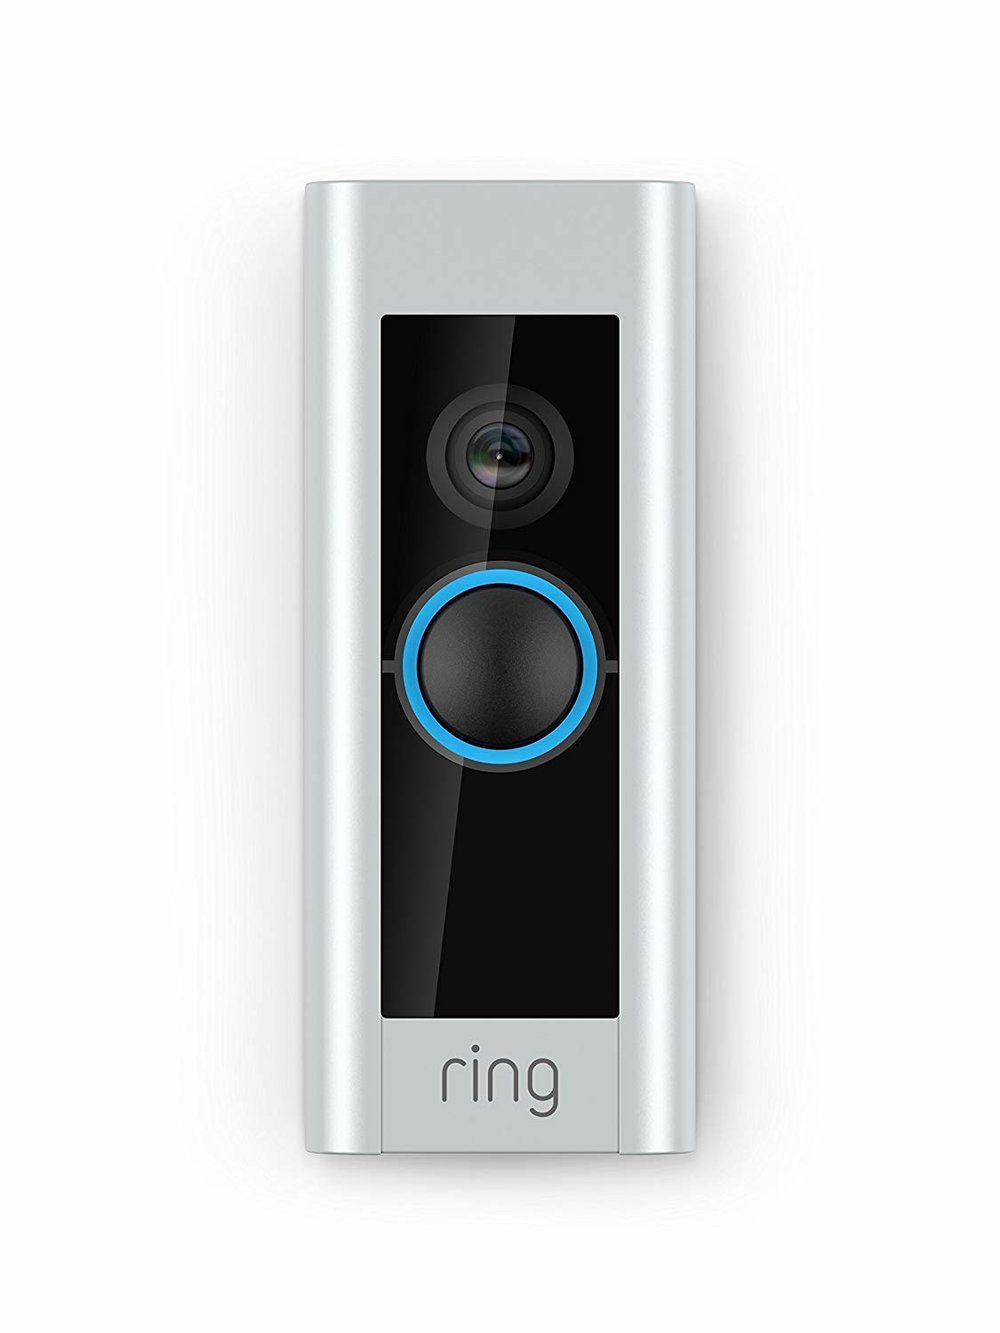 Conserveermiddel koel Nog steeds What transformer should I use with The Ring Doorbell Pro? —  OneHourSmartHome.com